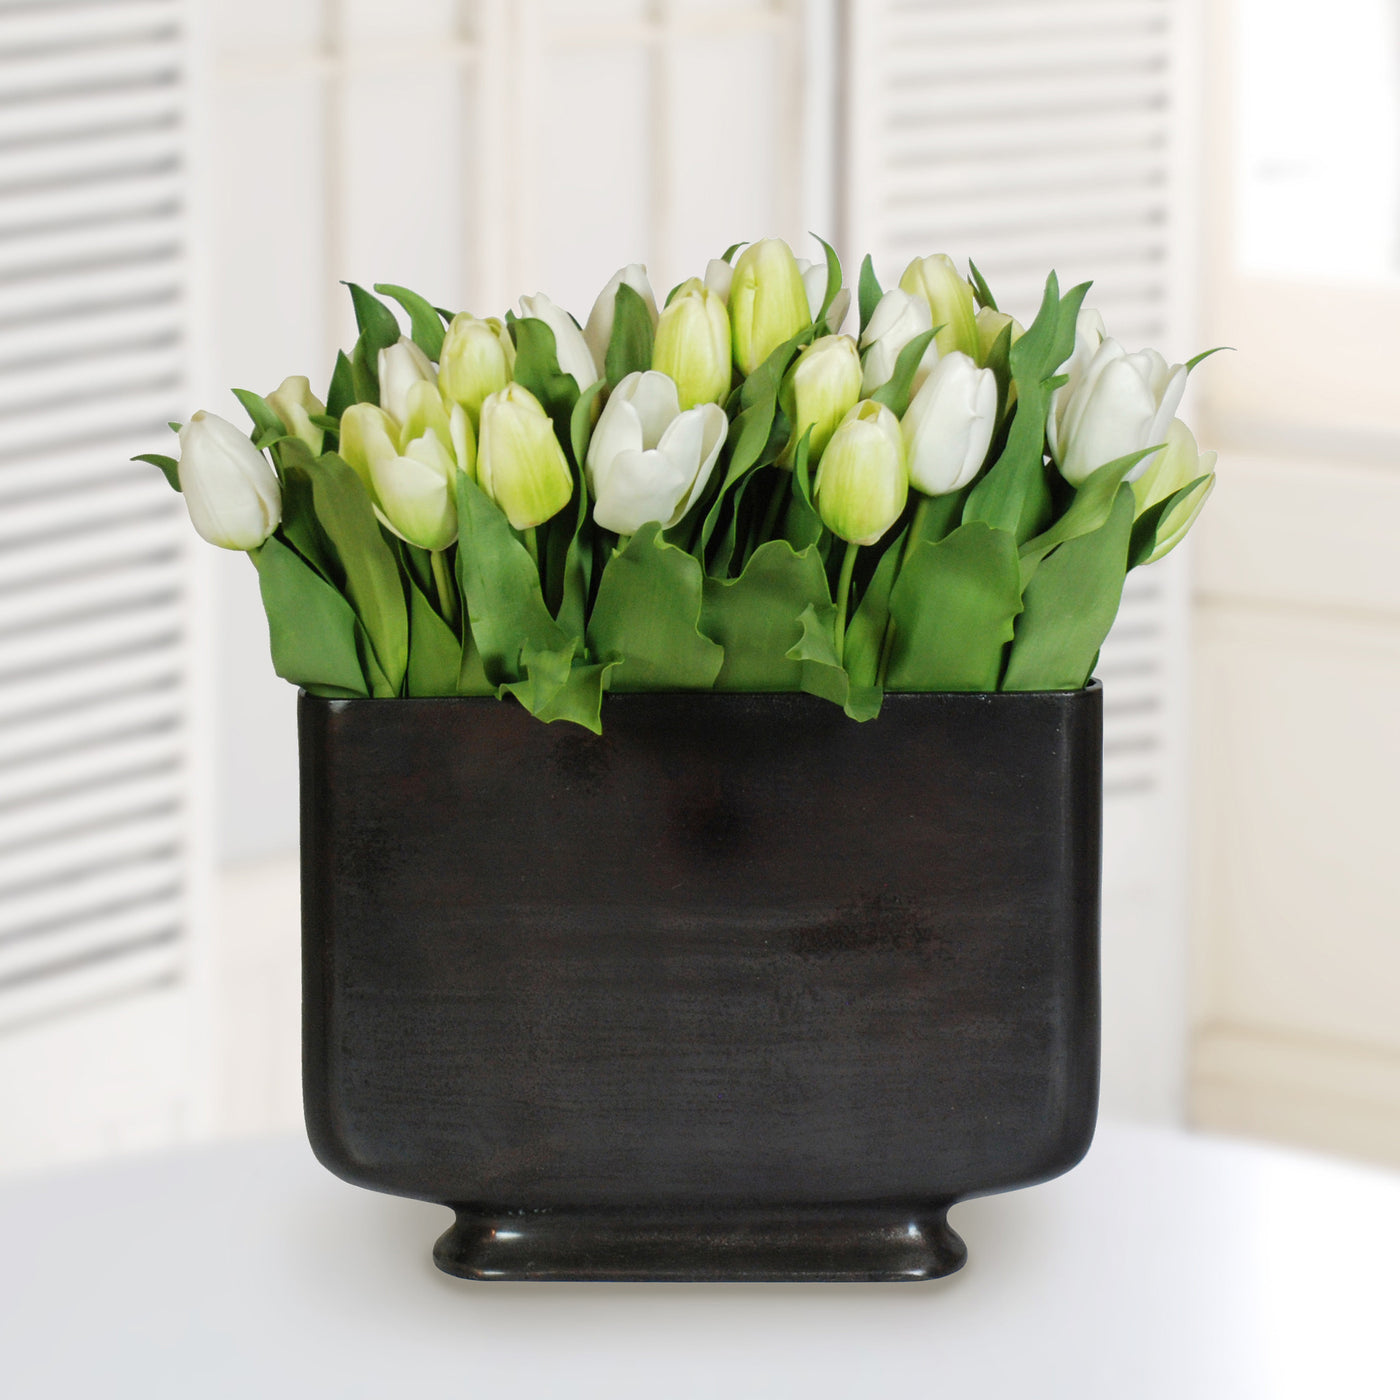 TULIP MIX IN PROFILE VASE (WHD069-GR) - Winward Home faux floral arrangements